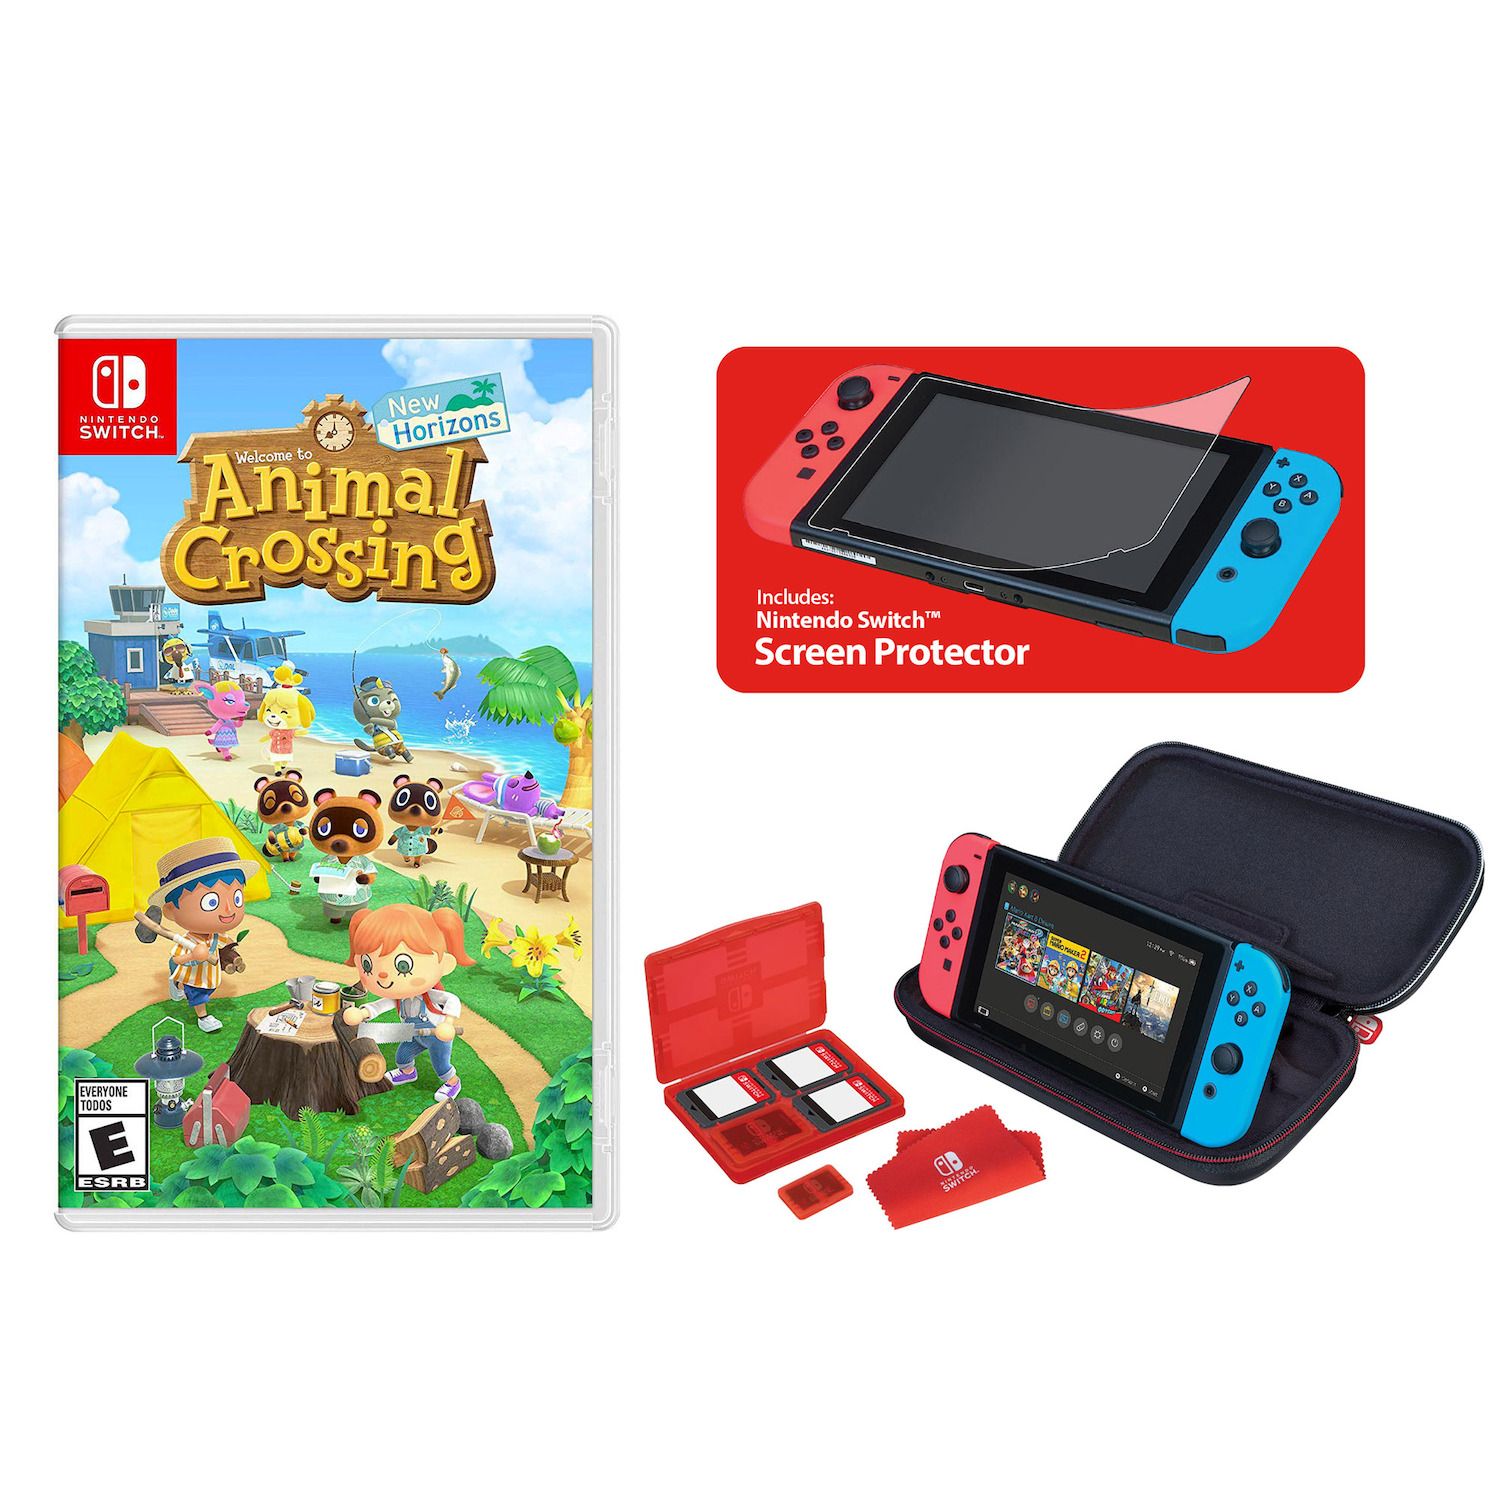 nintendo switch and animal crossing game